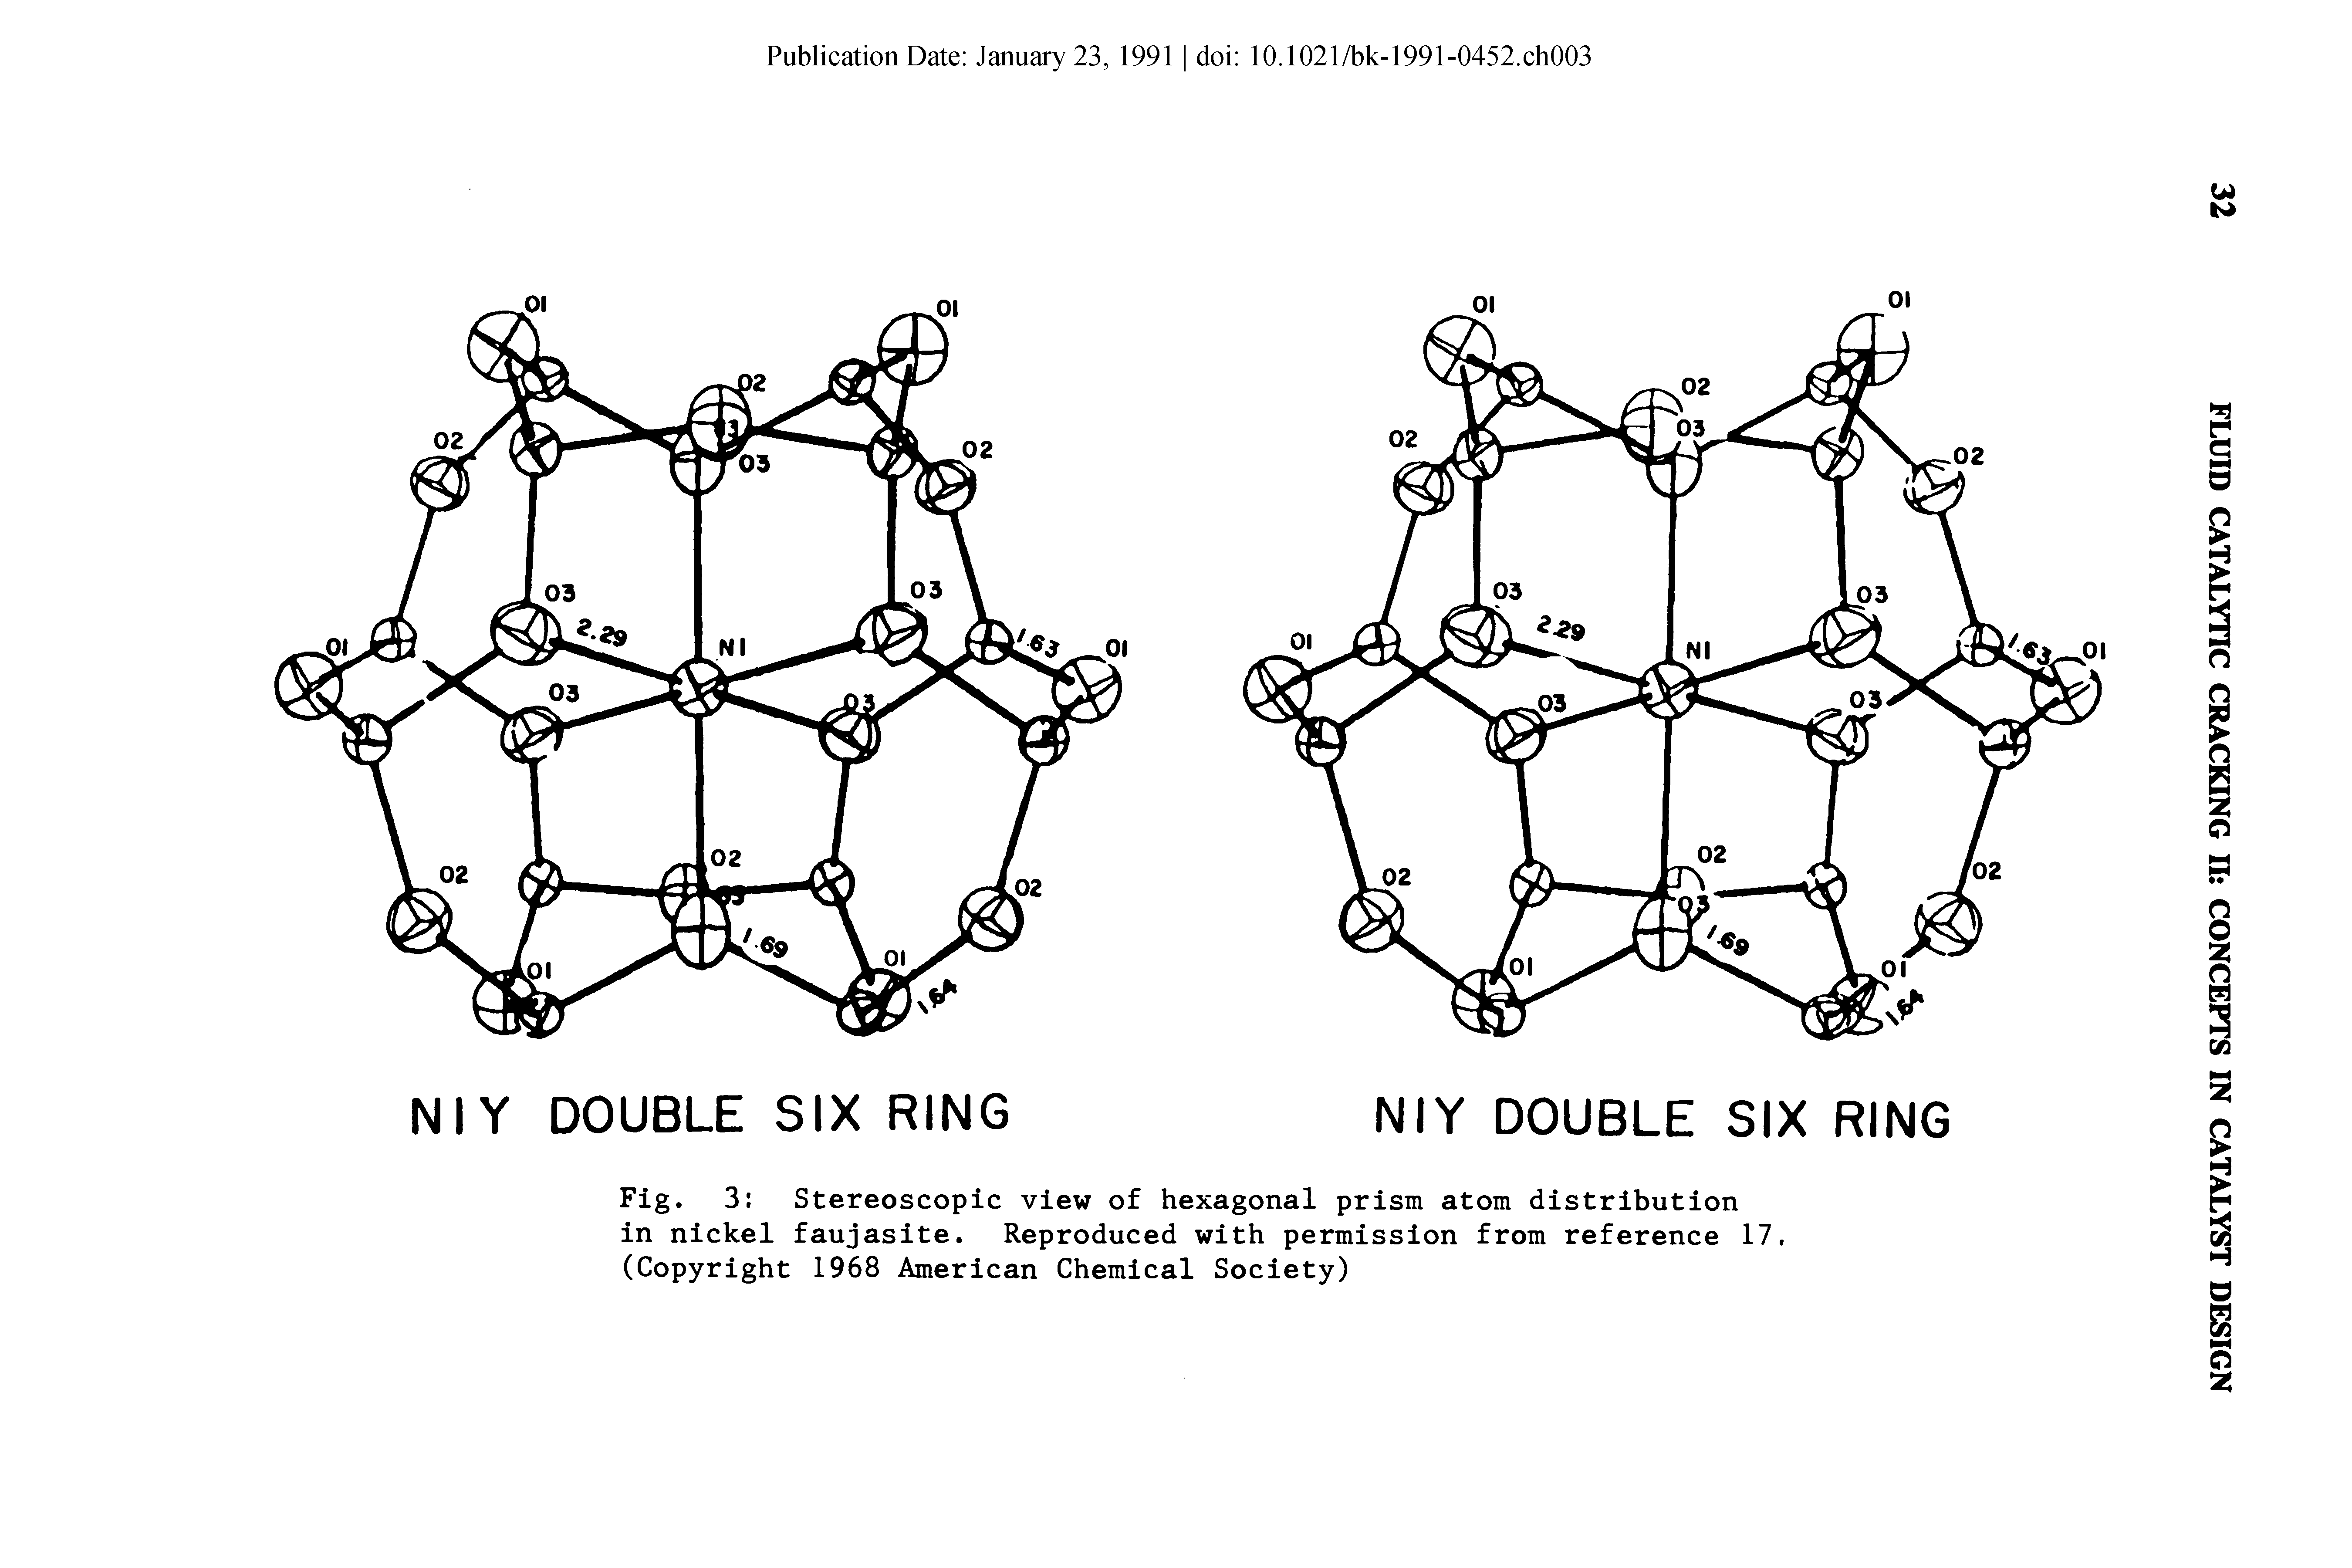 Fig. 3 Stereoscopic view of hexagonal prism atom distribution in nickel faujasite. Reproduced with permission from reference 17. (Copyright 1968 American Chemical Society)...